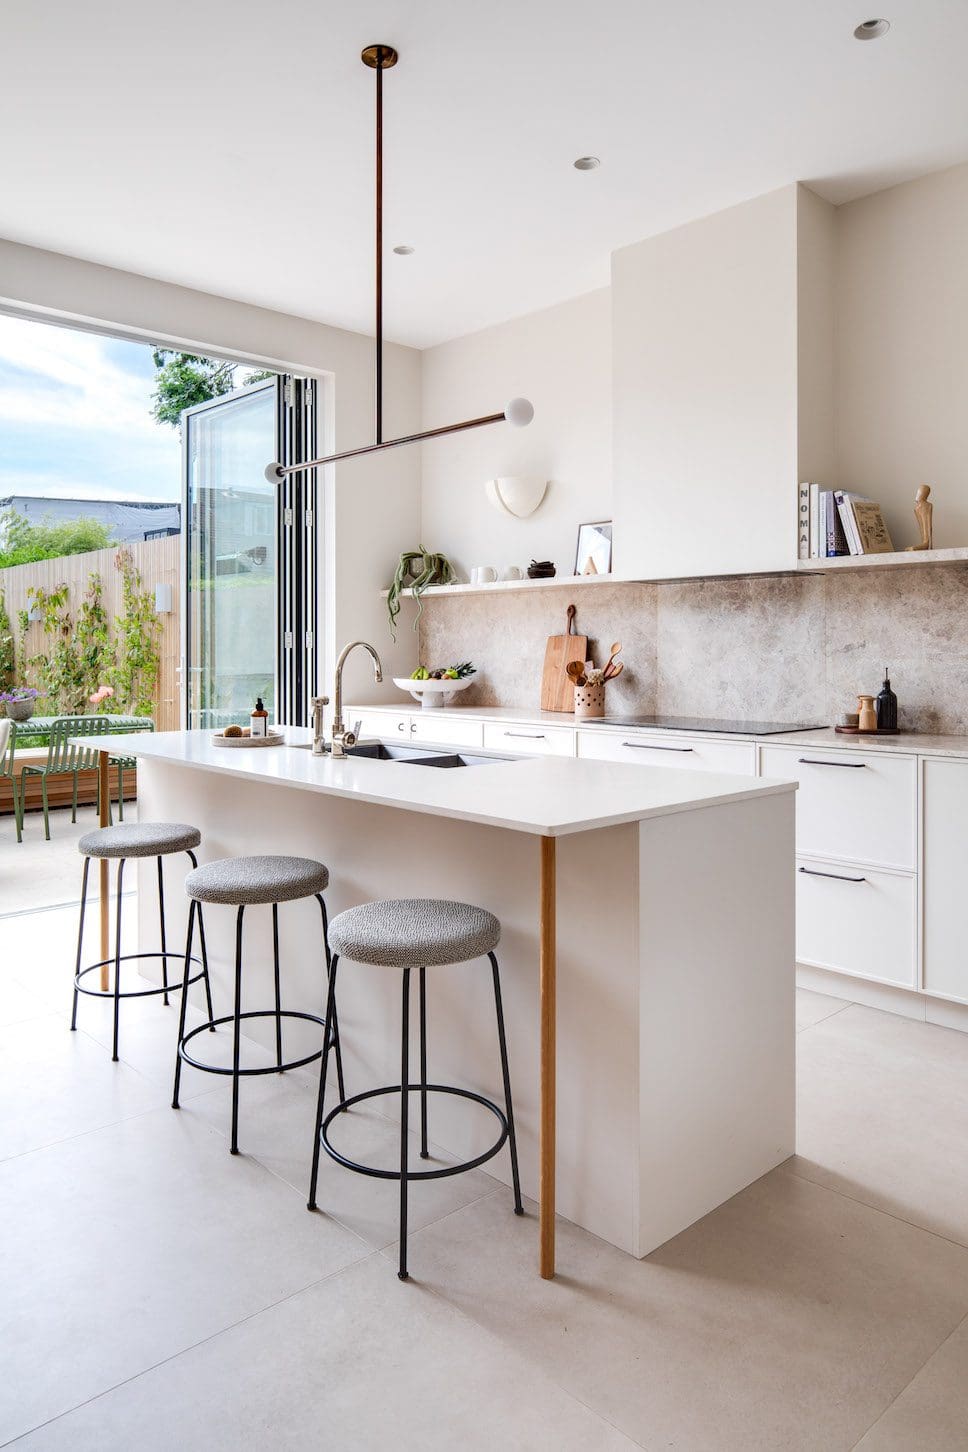 Sustainable Kitchens embraces neutral aesthetic